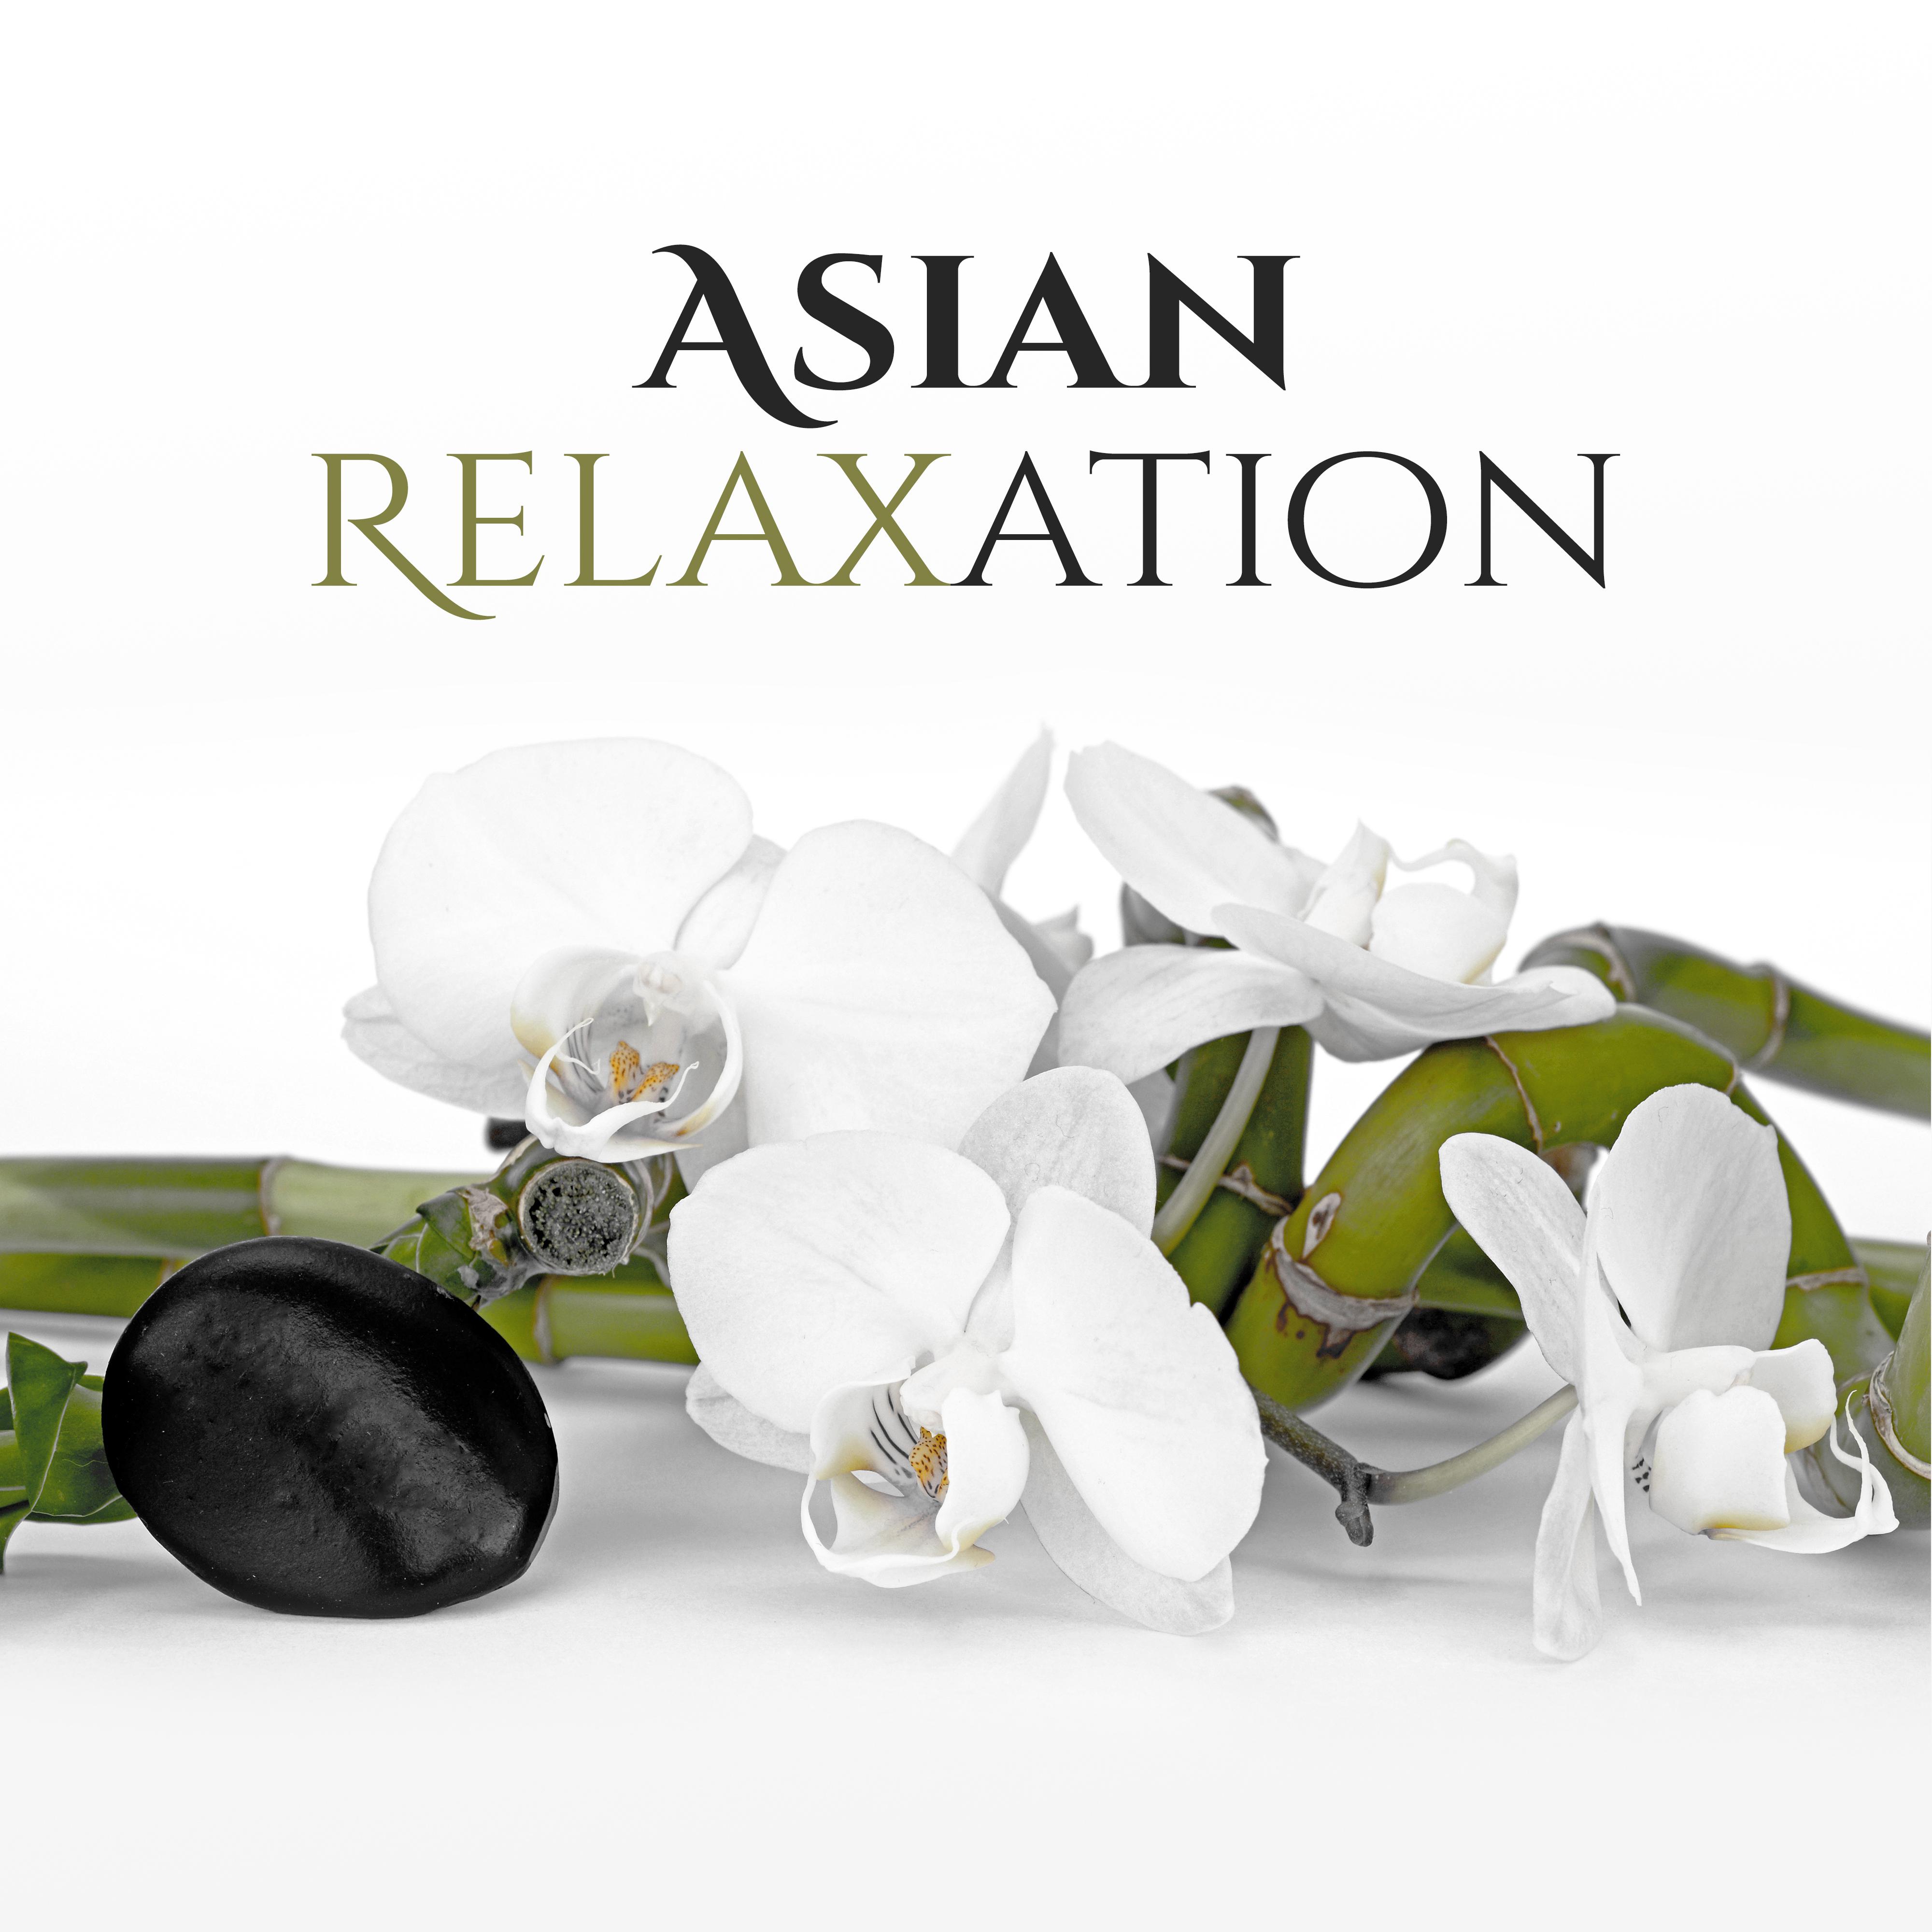 Asian Relaxation -  Deep Relaxation, Pure Spa Music, Rest, Zen, Nature Sounds, Music for Massage